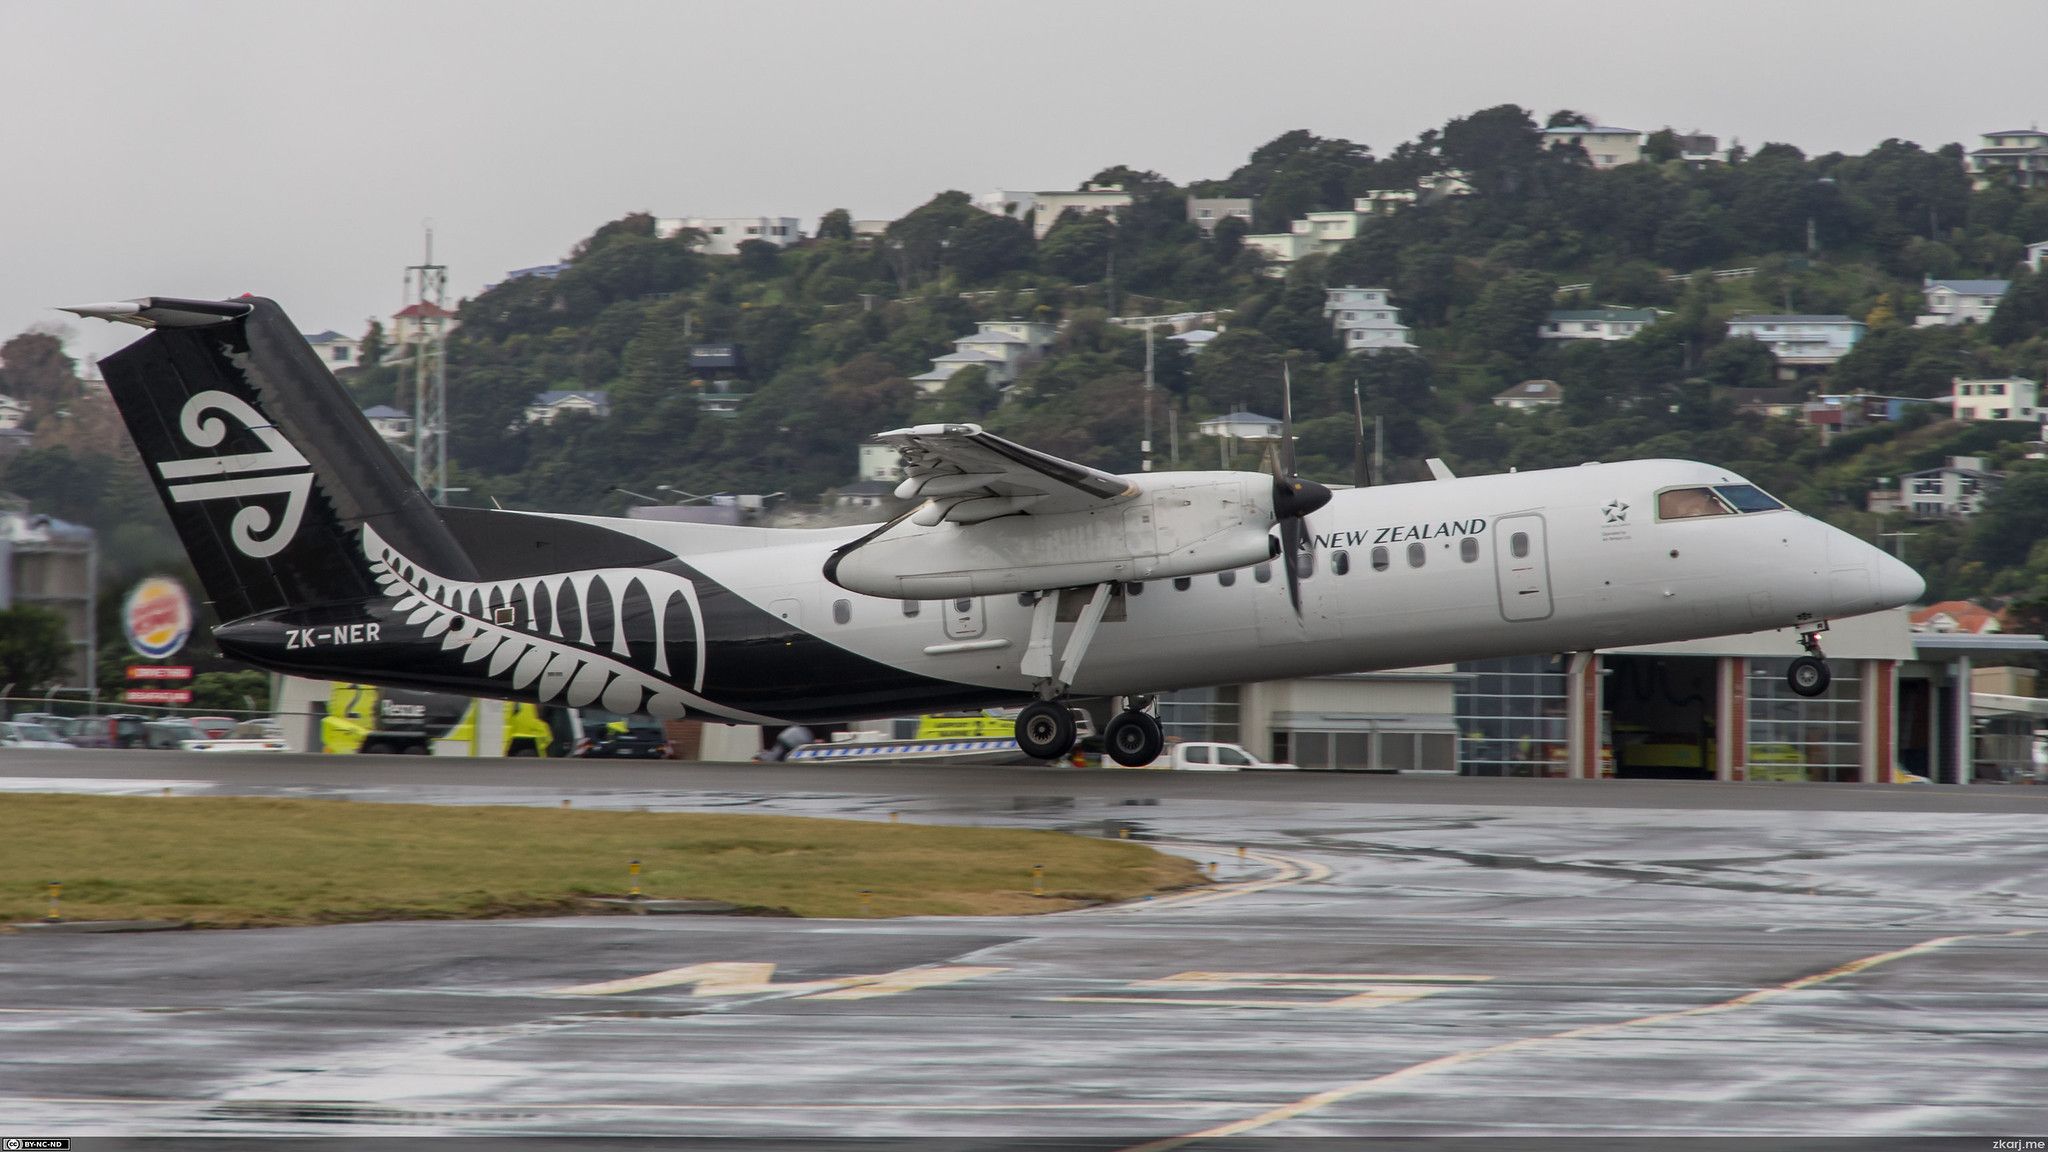 K5172602 - Air New Zealand ZK-NER Dash 8-300 taking off from Wellington Airport